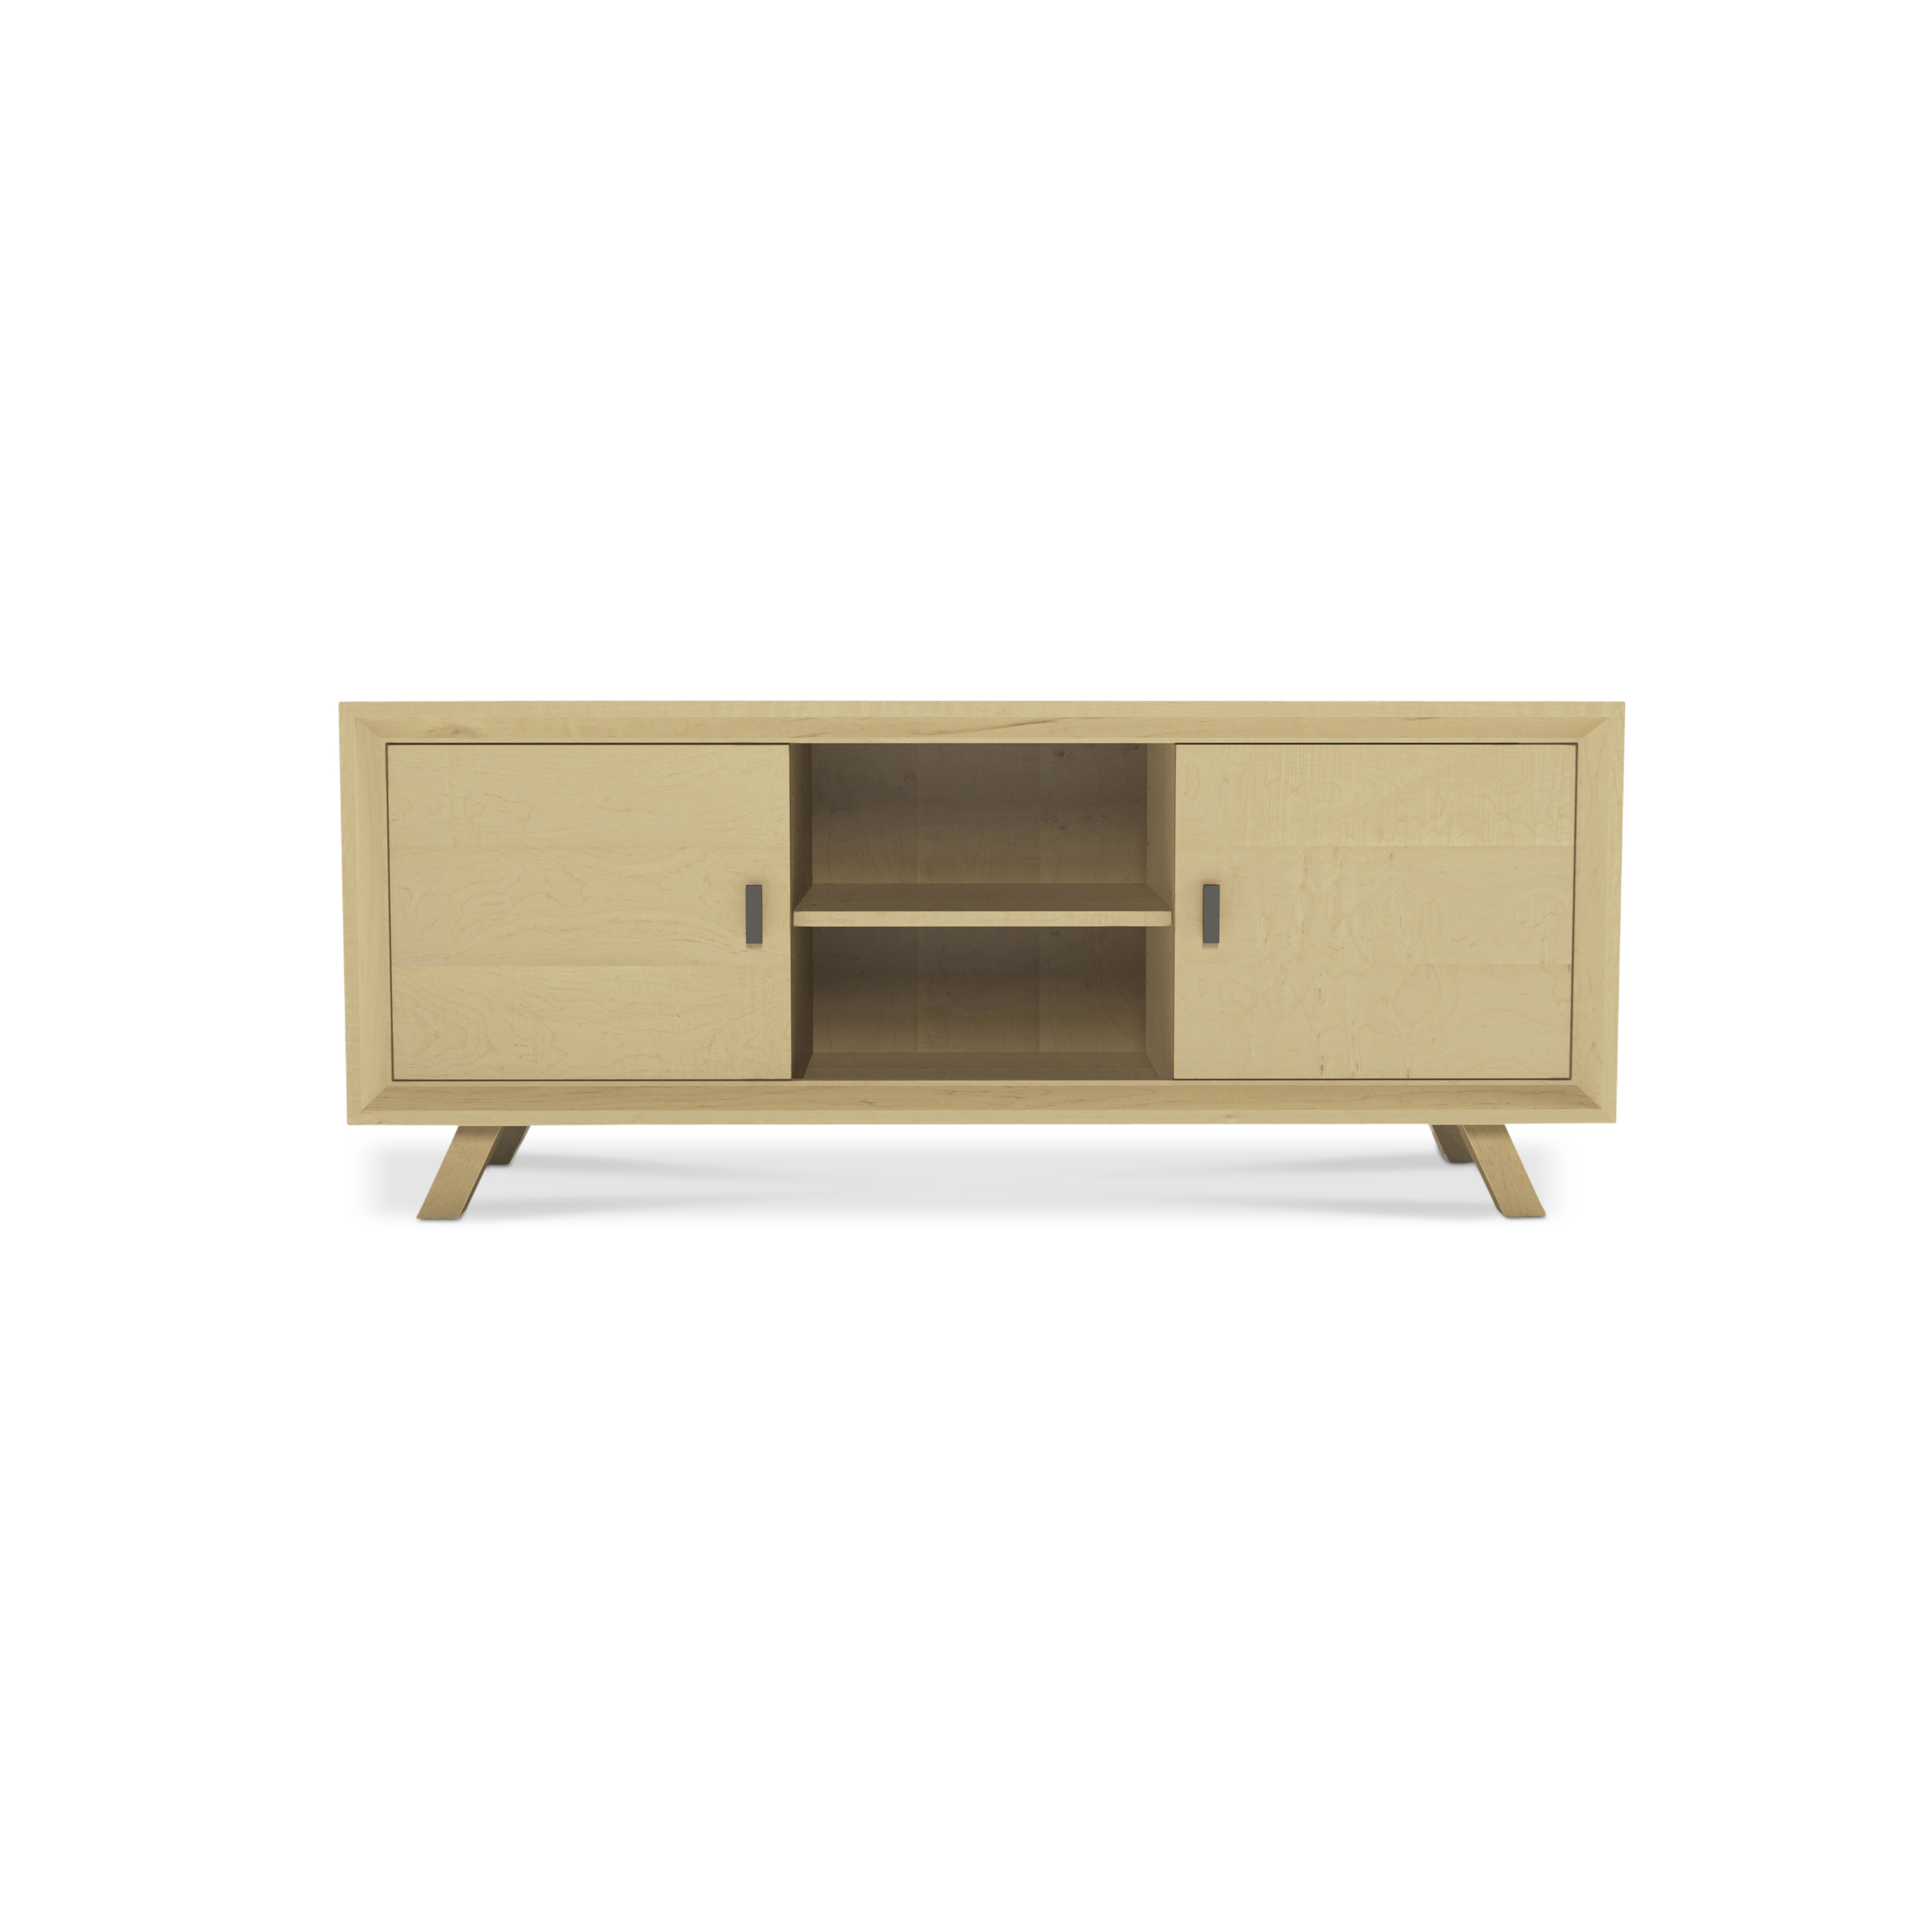 Series 555 Media Cabinet With Two Doors At 60″ In Width